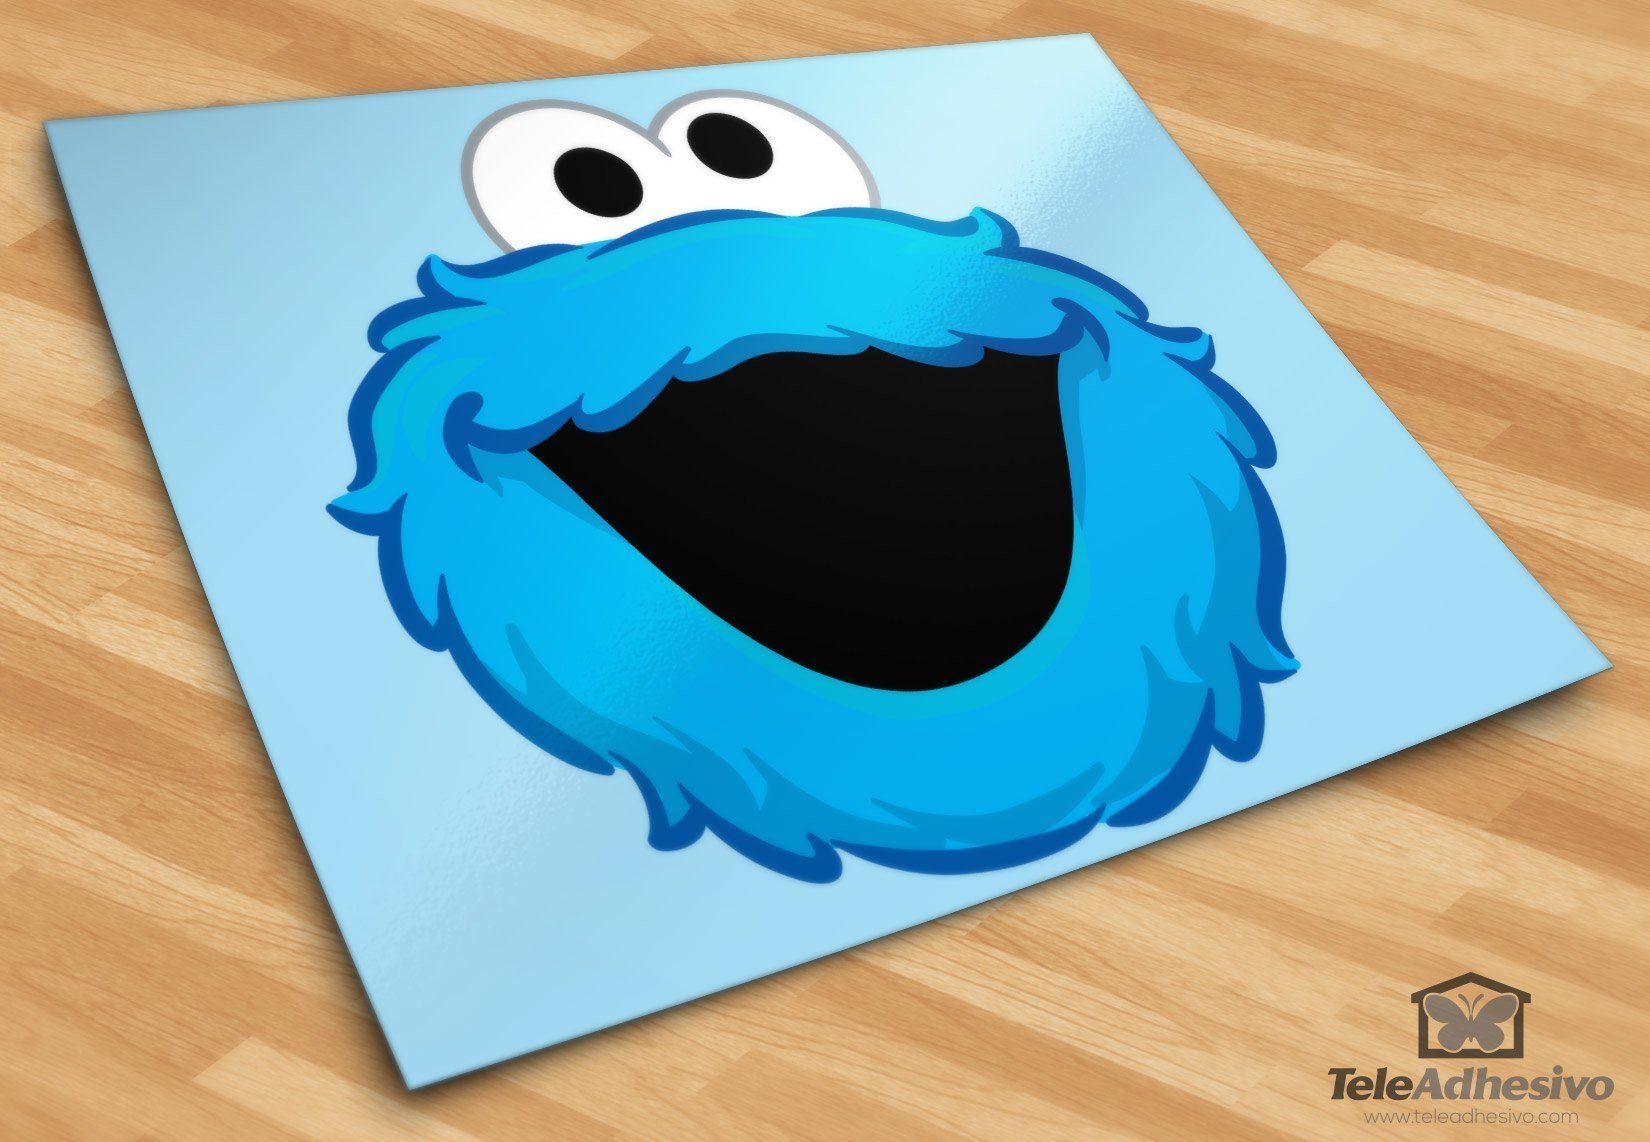 Stickers for Kids: Monster cookies laughter